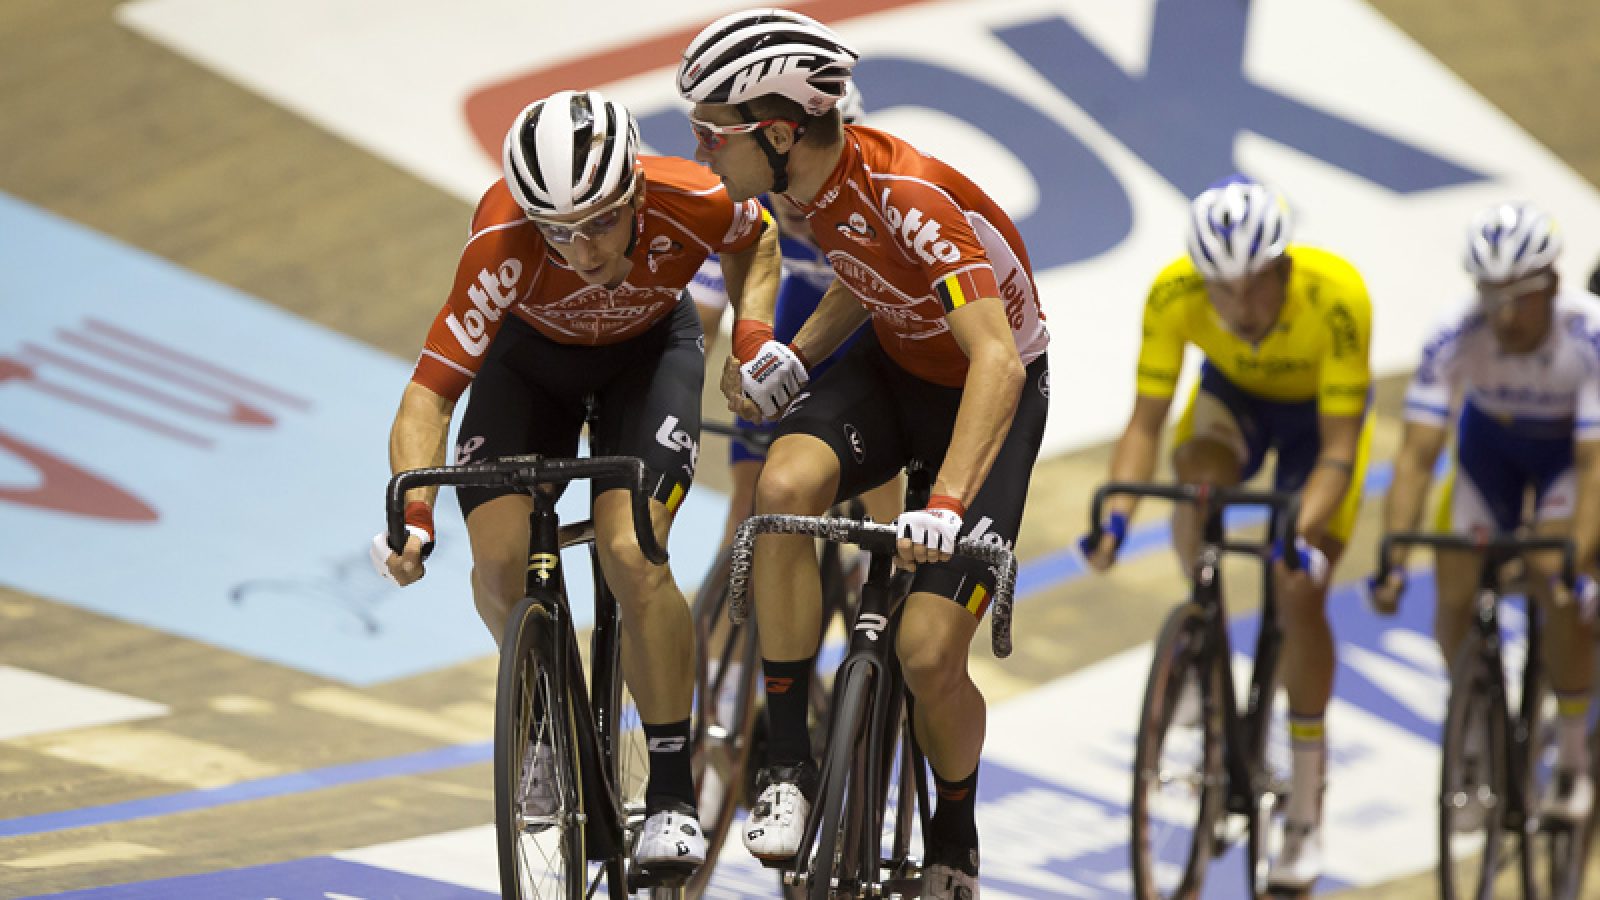 Belgian Jasper De Buyst and Belgian Tosh Van der Sande pictured during the first day of the Zesdaagse Vlaanderen-Gent six-day indoor cycling race at the indoor cycling arena 't Kuipke, Tuesday 13 November 2018, in Gent. This year's edition takes place from November 13th until November 18th. BELGA PHOTO KRISTOF VAN ACCOM